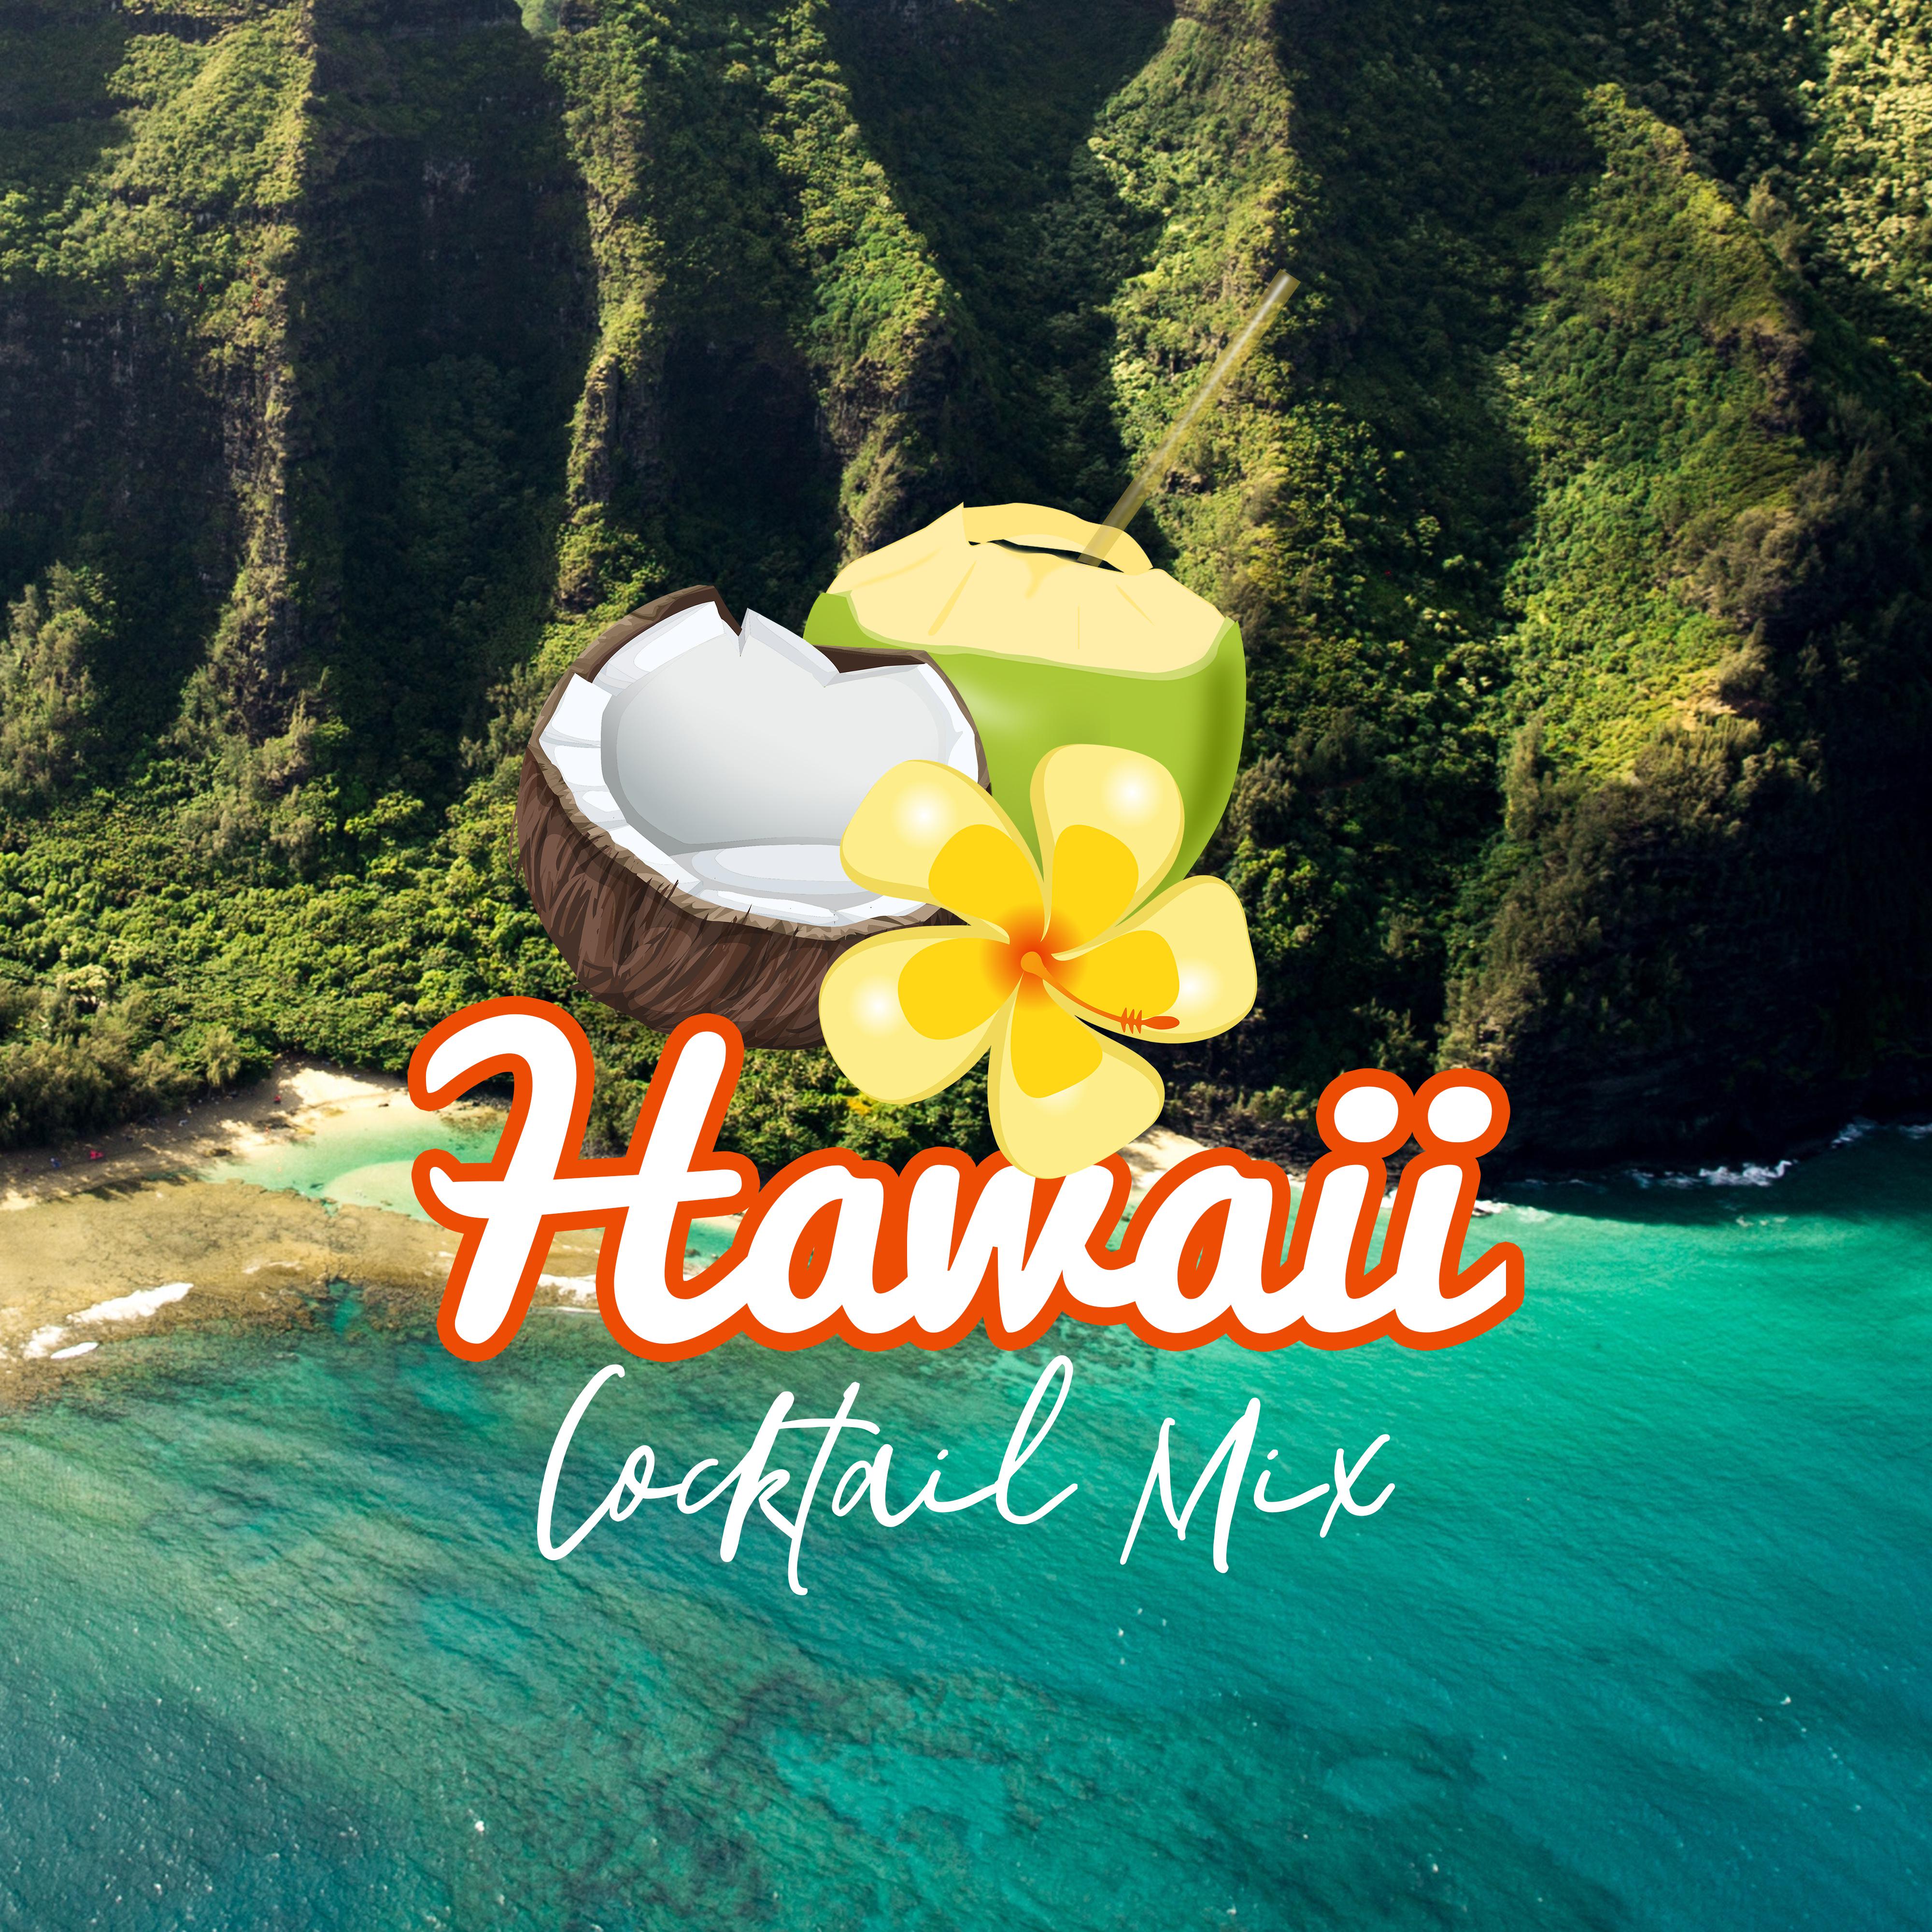 Hawaii Cocktail Mix: Chillout 2019 Music Compilation for Perfect Summer Vacation Celebration, Most Relaxing Songs for Sunny Beach Relaxation